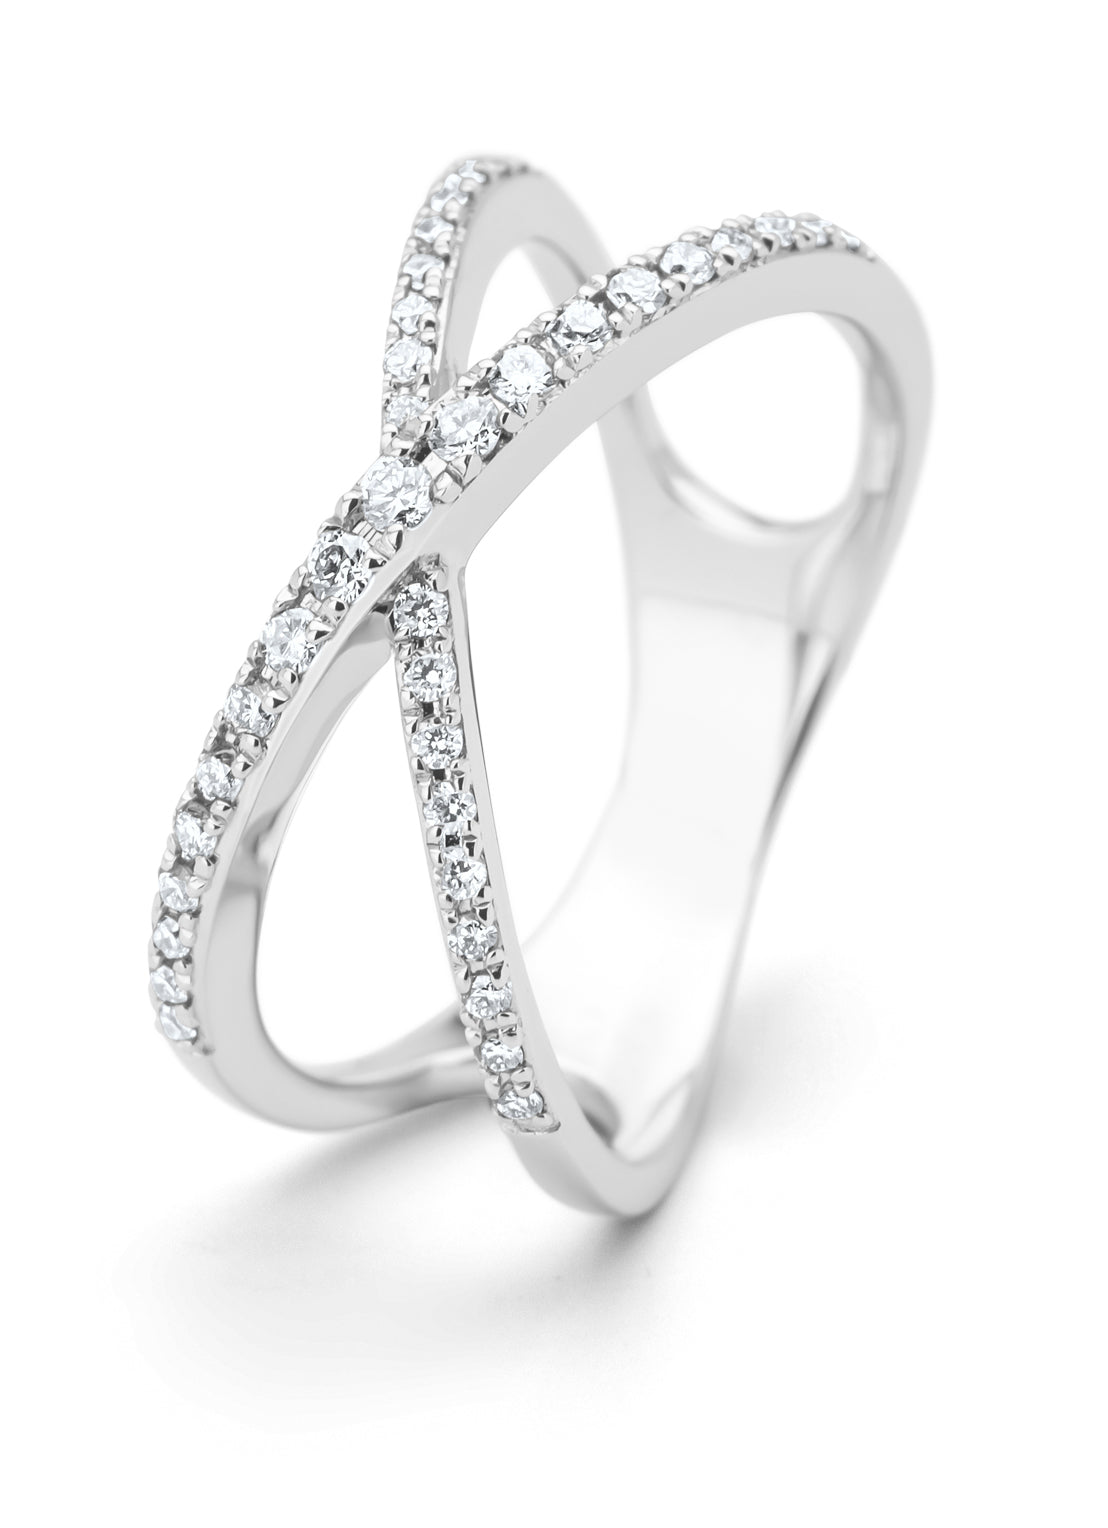 White gold ring, 0.25 ct diamond, like a star